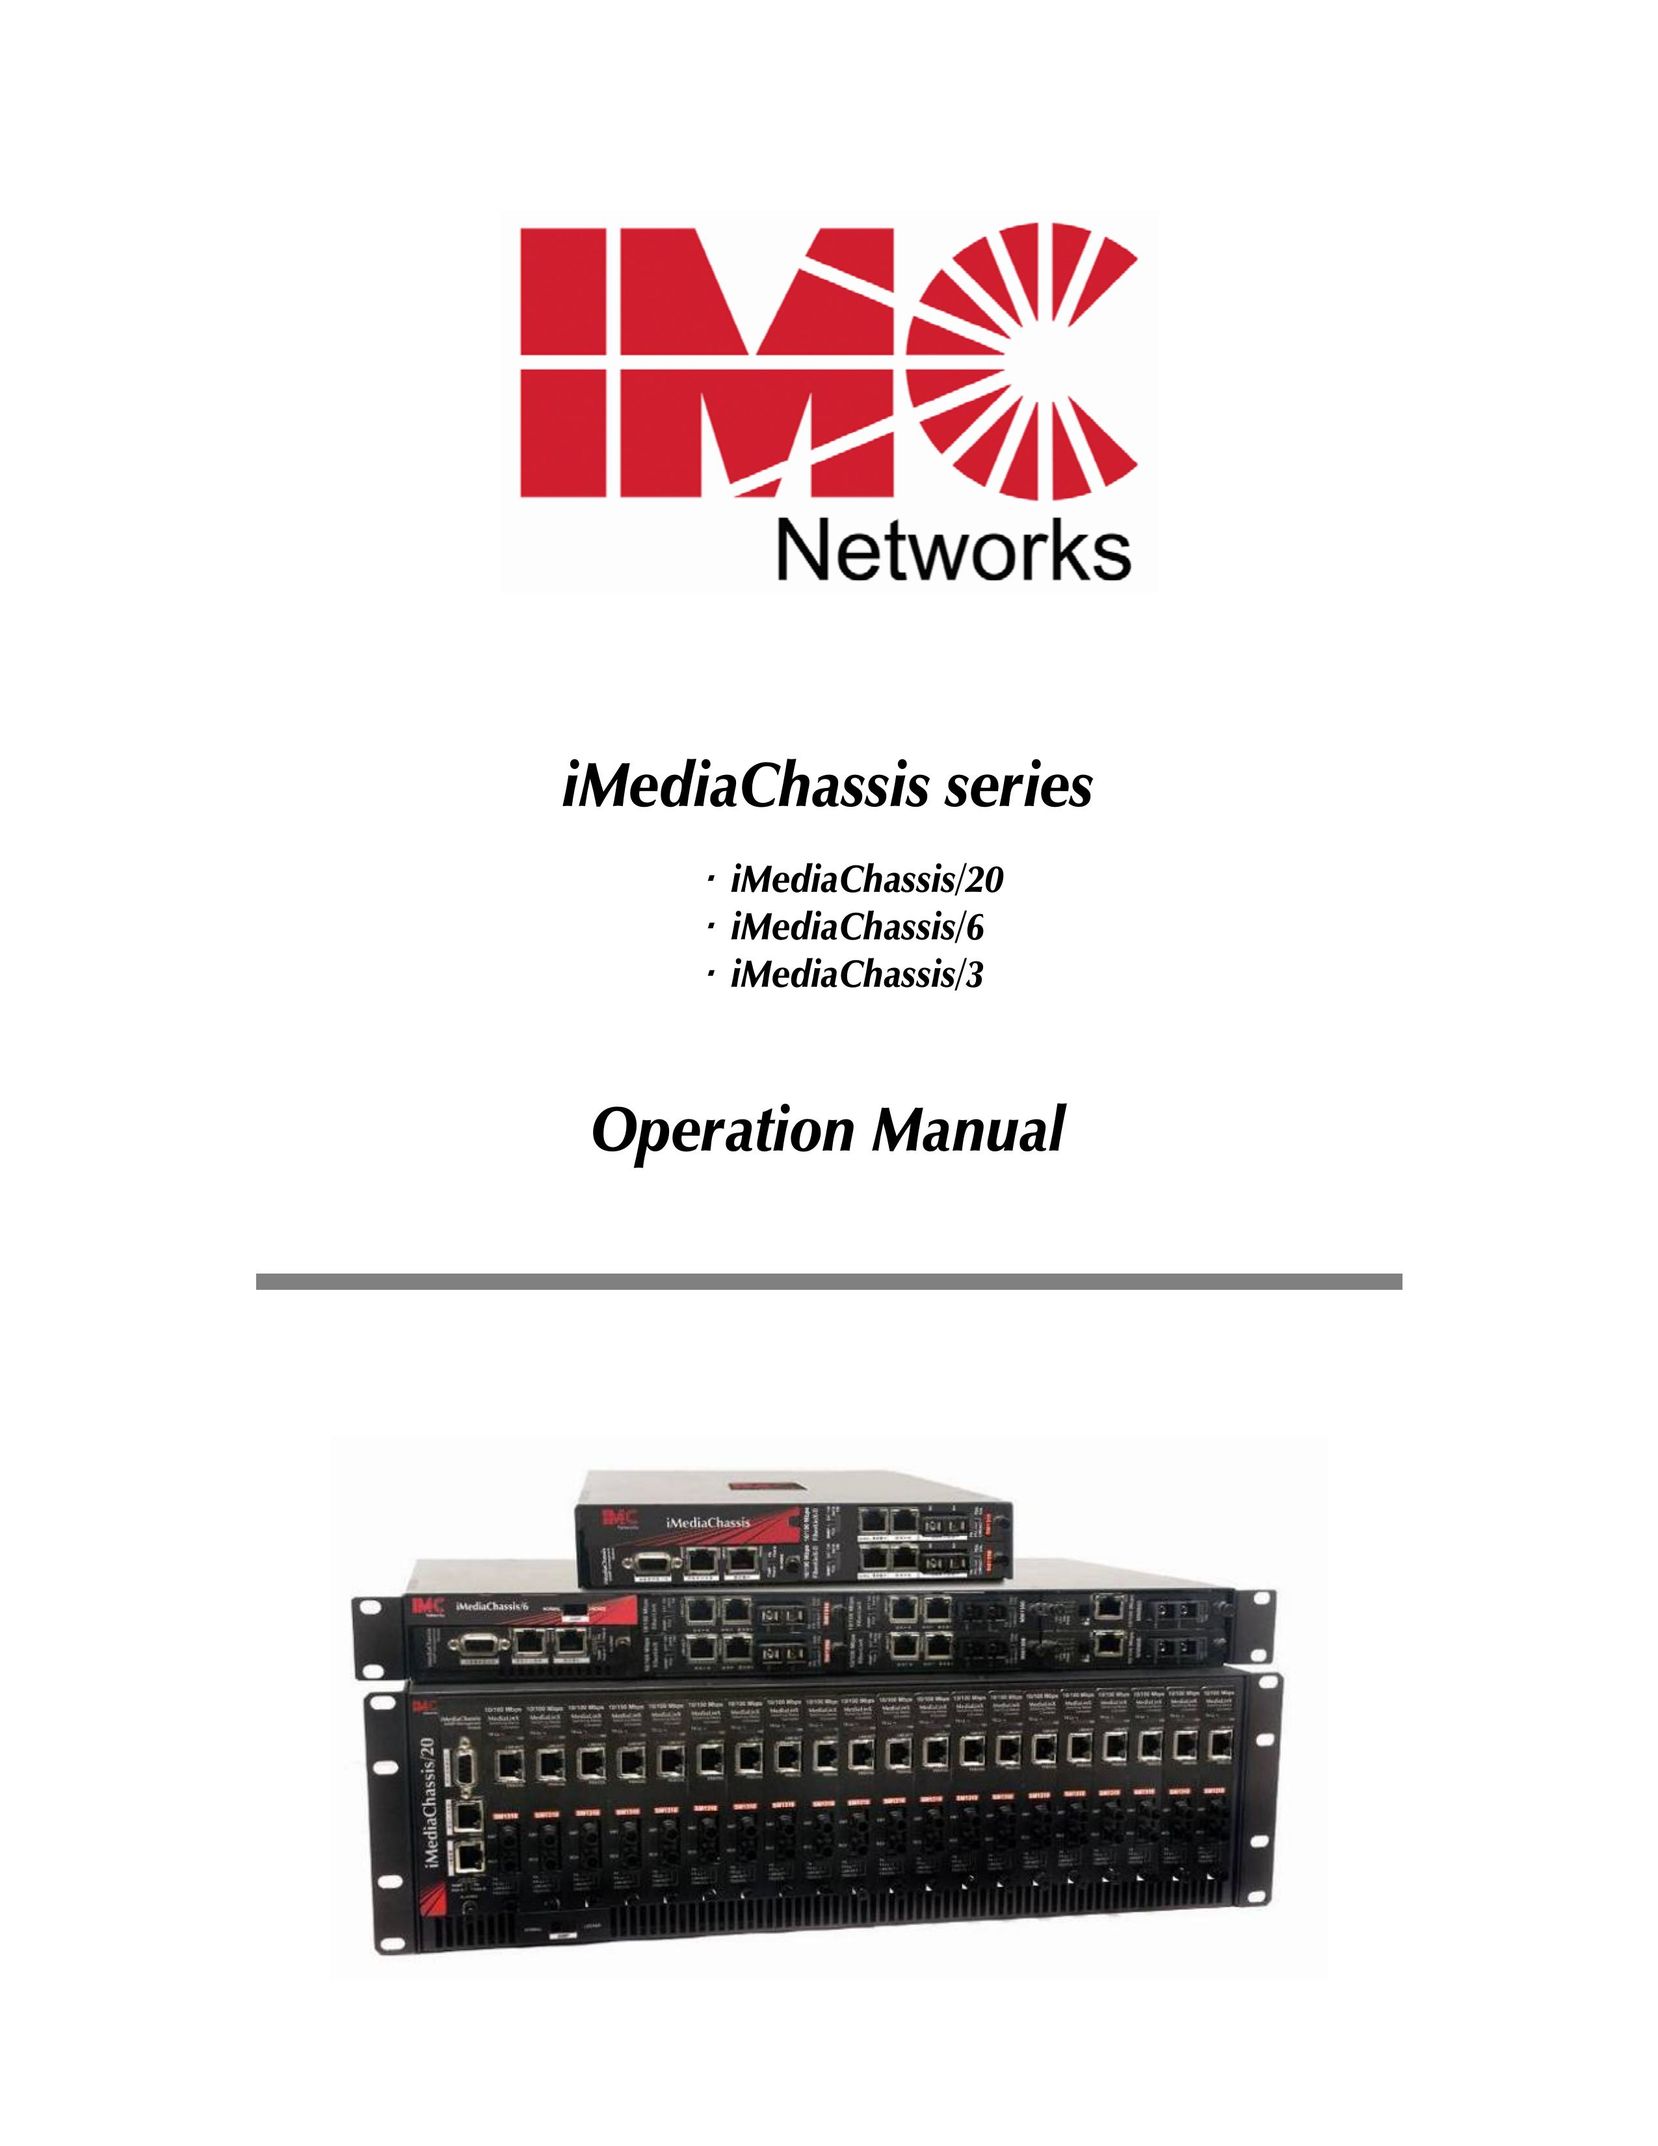 IMC Networks iMediaChassis/3 Network Router User Manual